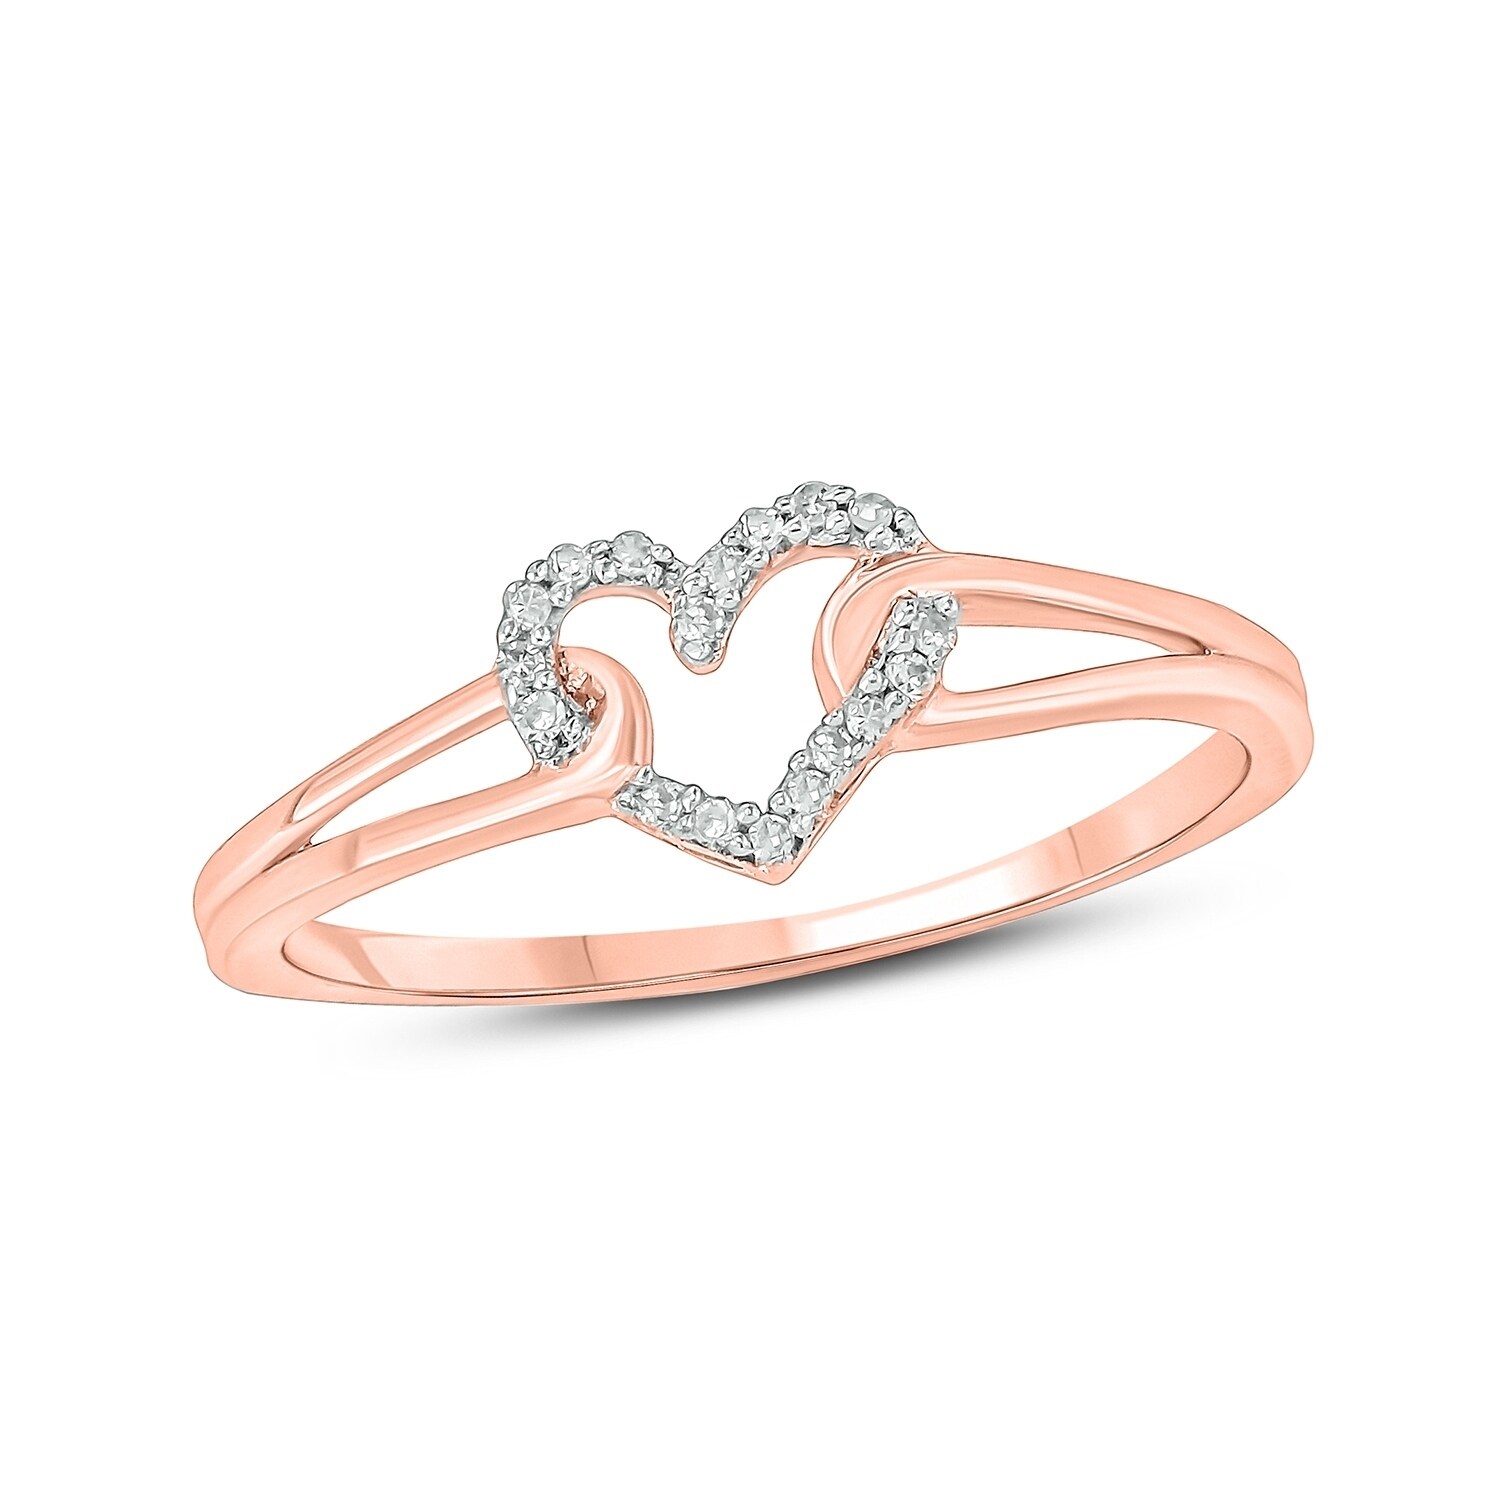 G-H,I2-I3 Diamond Wedding Band in 10K Pink Gold Size-10.5 1/20 cttw, 